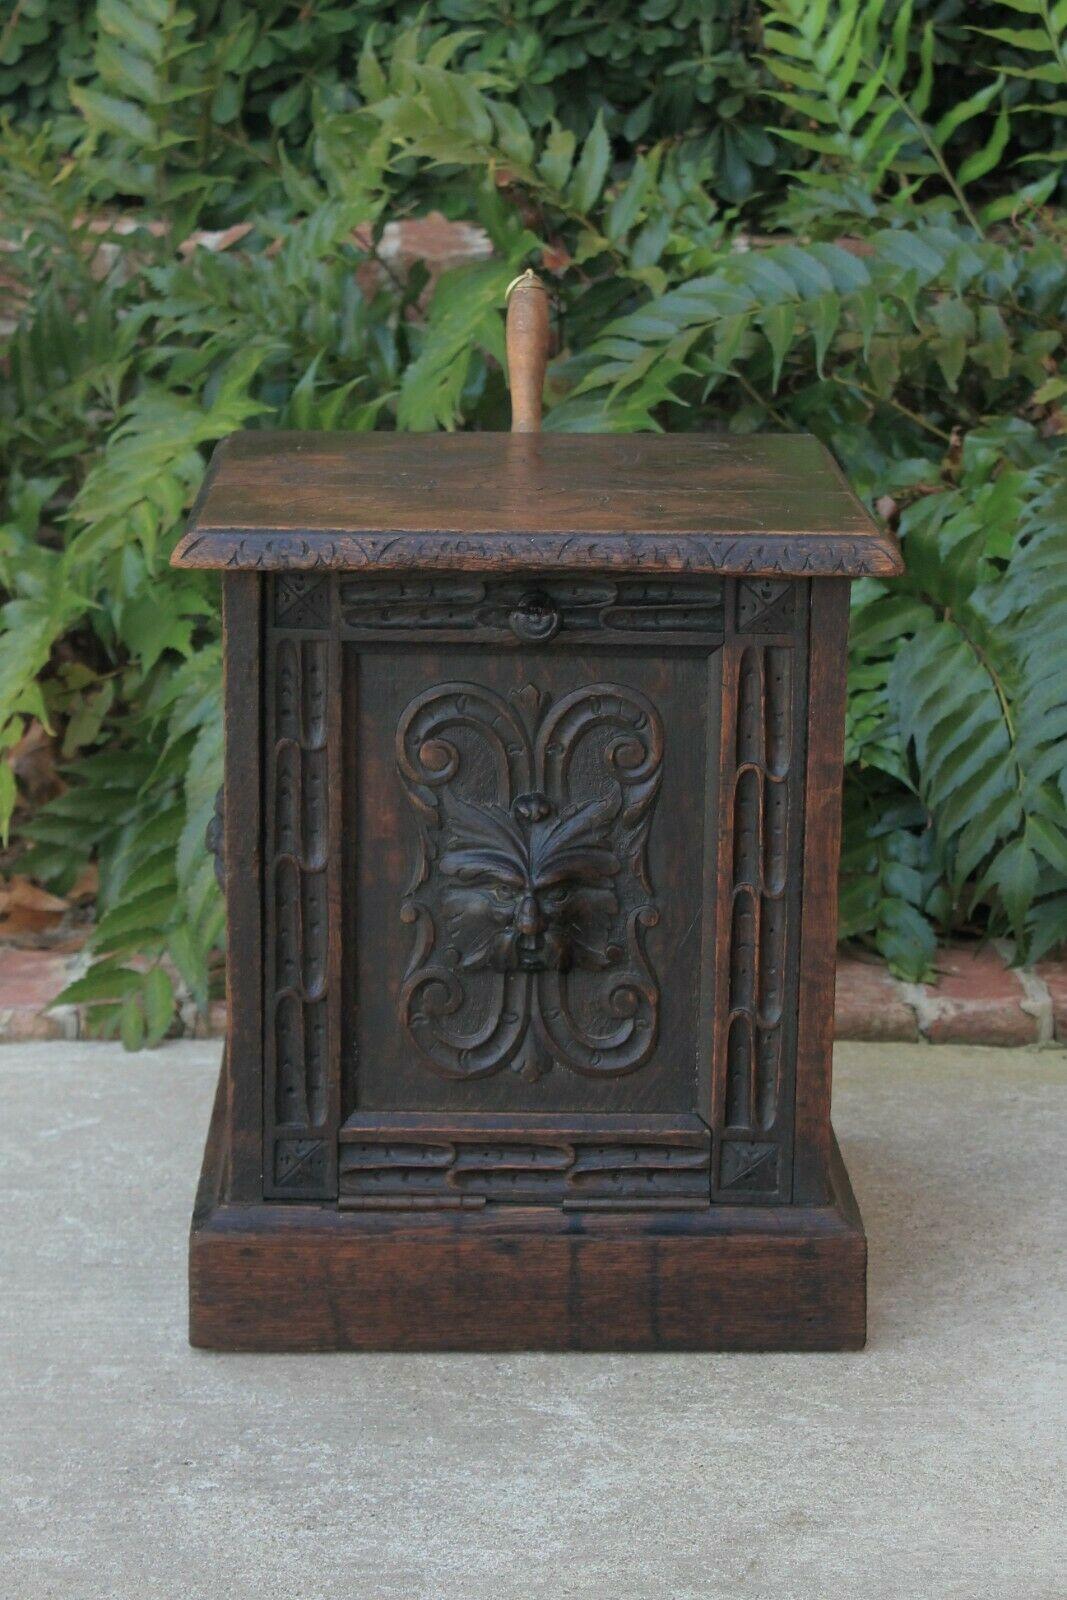 Antique English Oak Renaissance revival carved oak fall front coal hod scuttle with brass scoop~~c. 1880s-1890s

Ornate relief carved beveled edge top with torch carvings~~